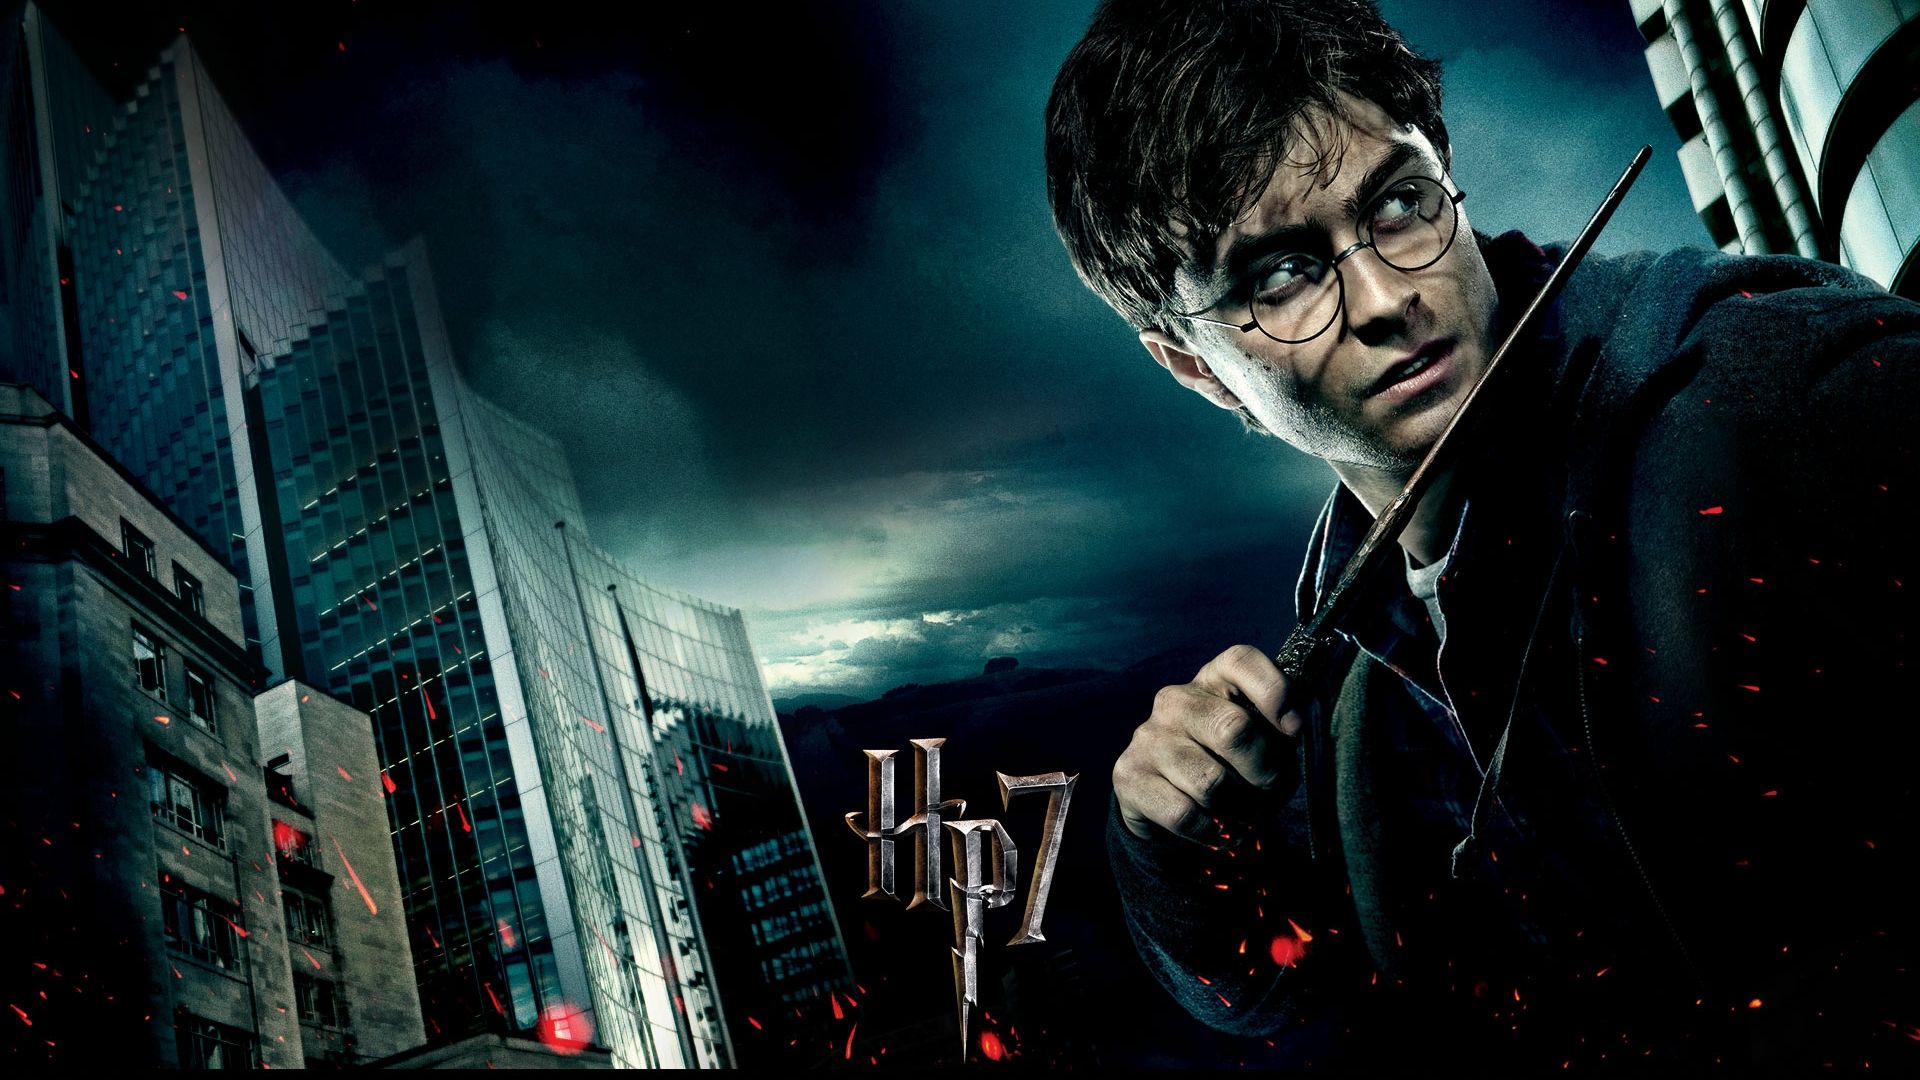 Free download Harry Potter and the Deathly Hallows Wallpapers HD